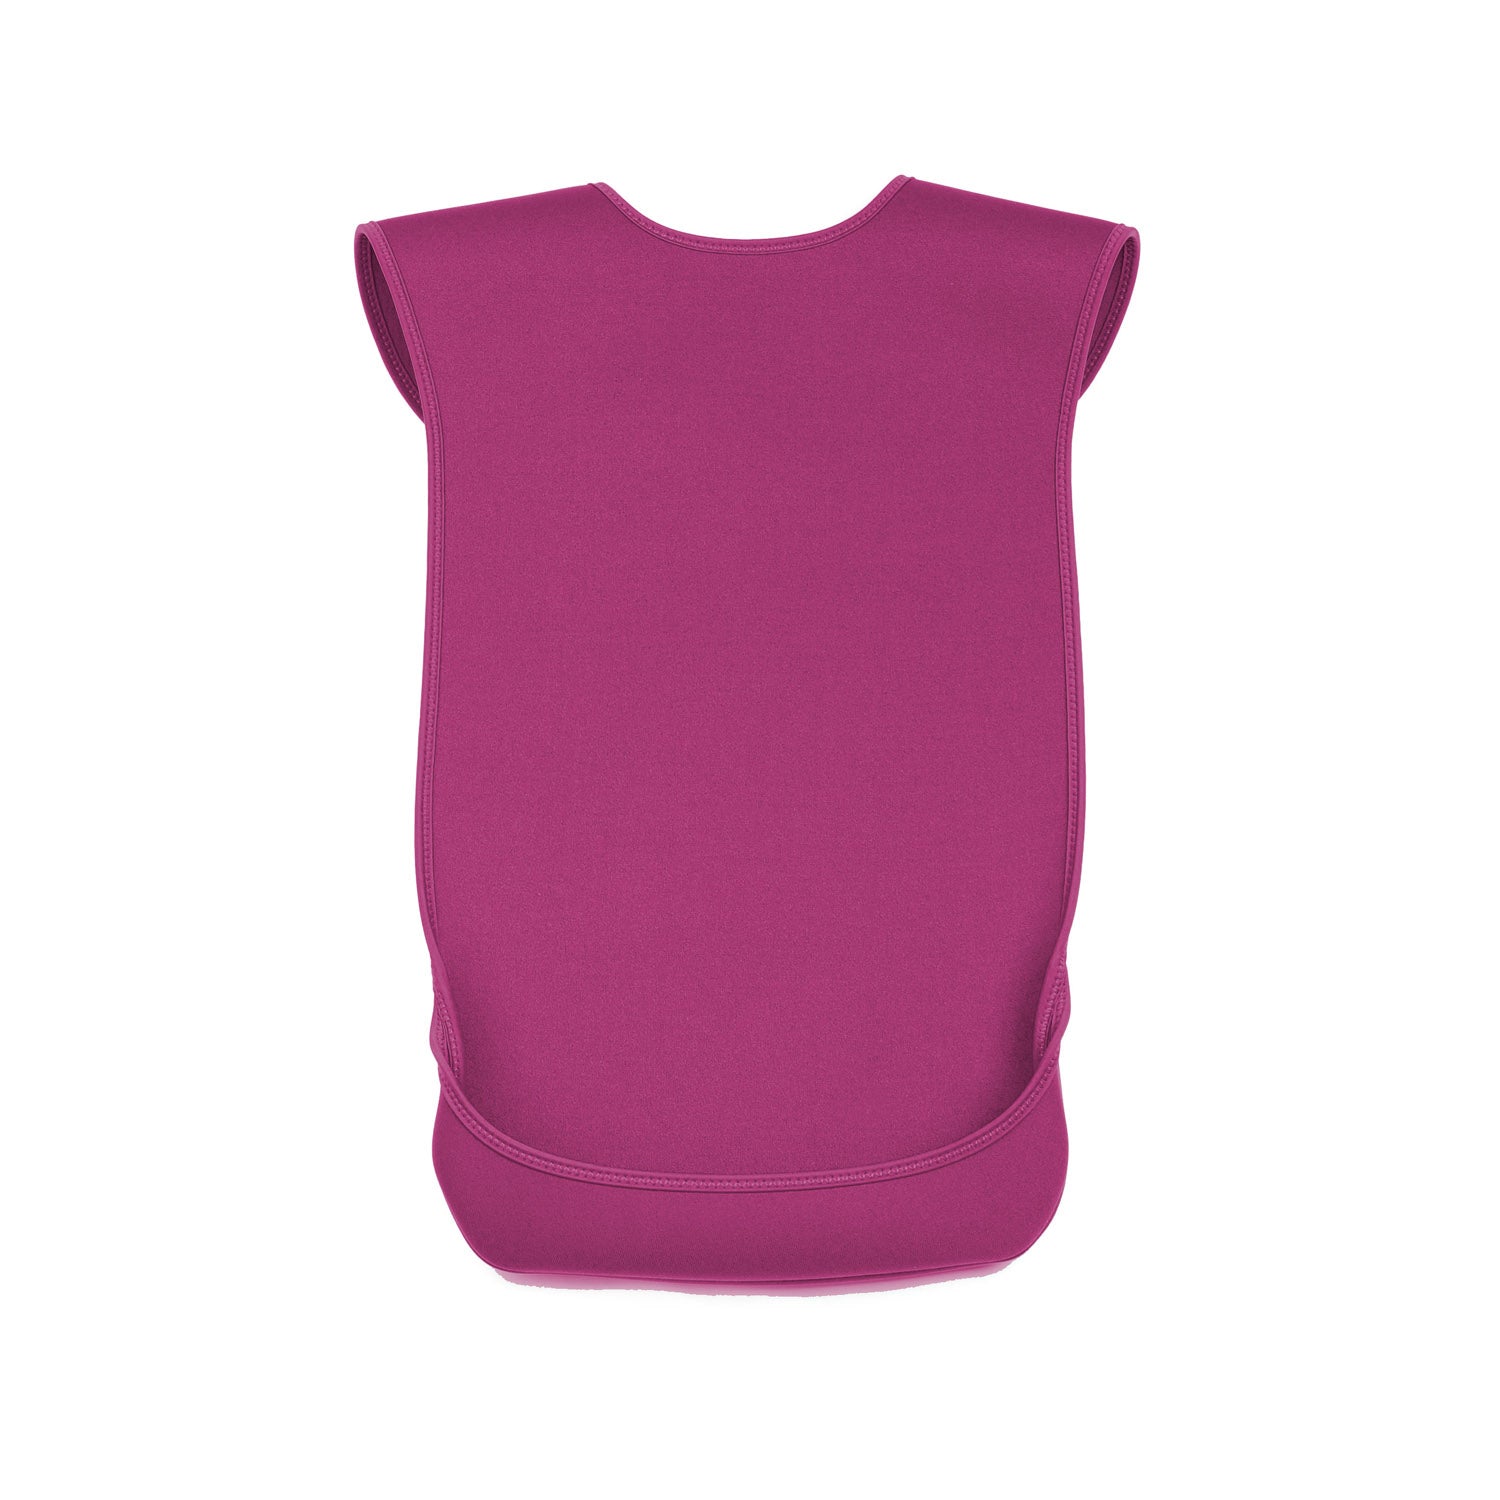 CareDesign_small_tabard_for_special_needs_toddlers_girls_adults_pink_bib_with_feeding_catching_pouch